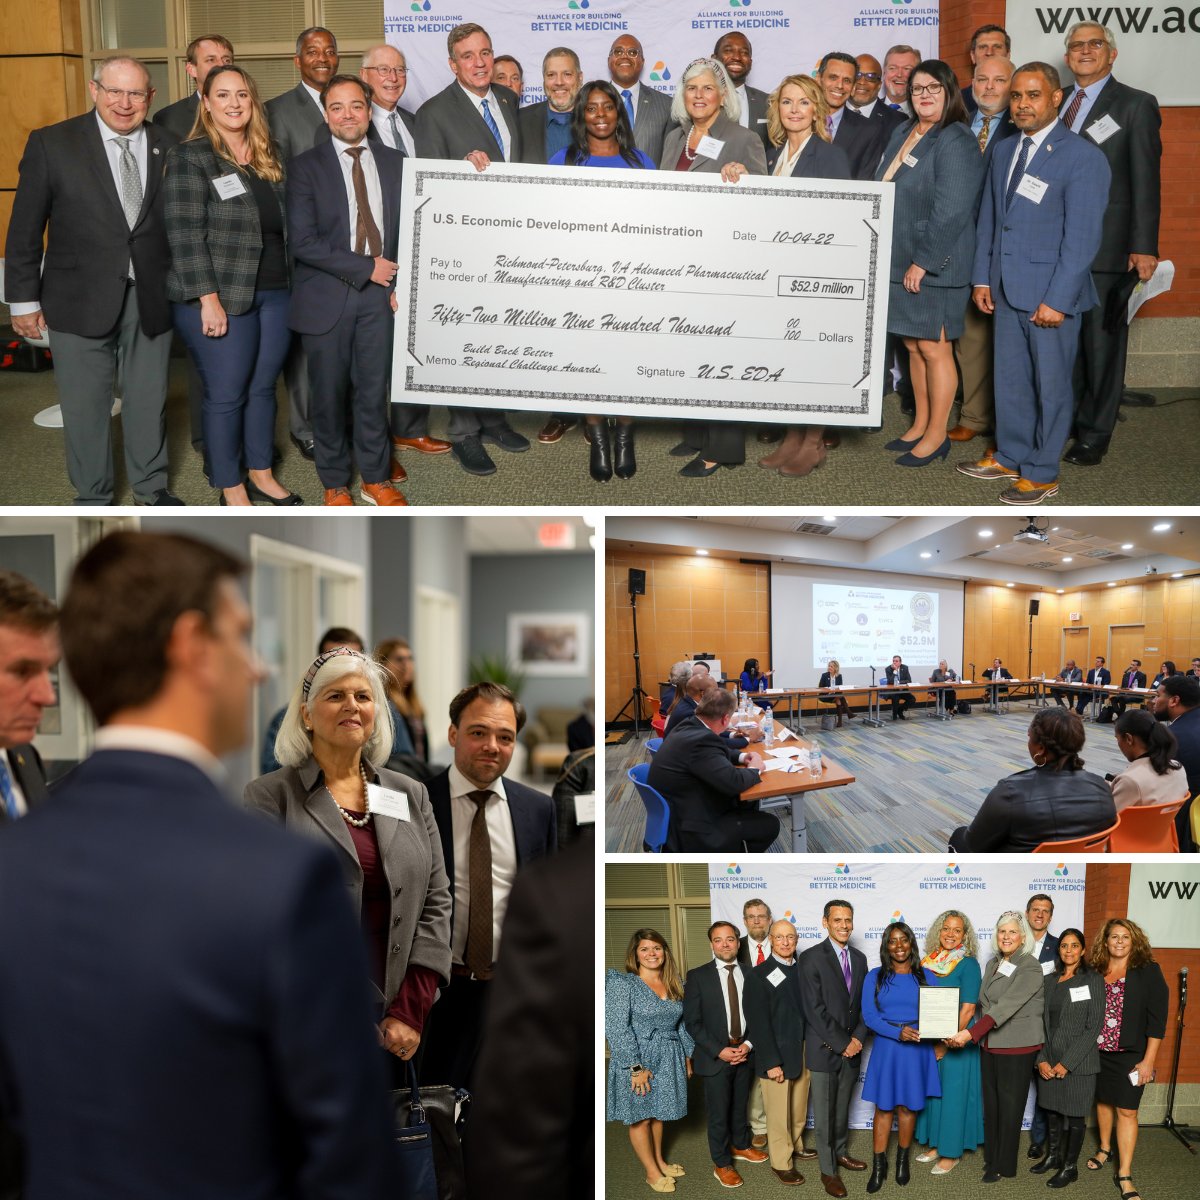 Yesterday w/ partners in the @allianceformed we hosted members of @US_EDA @MarkWarnerVA & other officials to discuss and celebrate the Build Back Better Regional Challenge Advanced Pharmaceutical Manufacturing Cluster at the VA Bio+Tech Park. bit.ly/3T1msb5